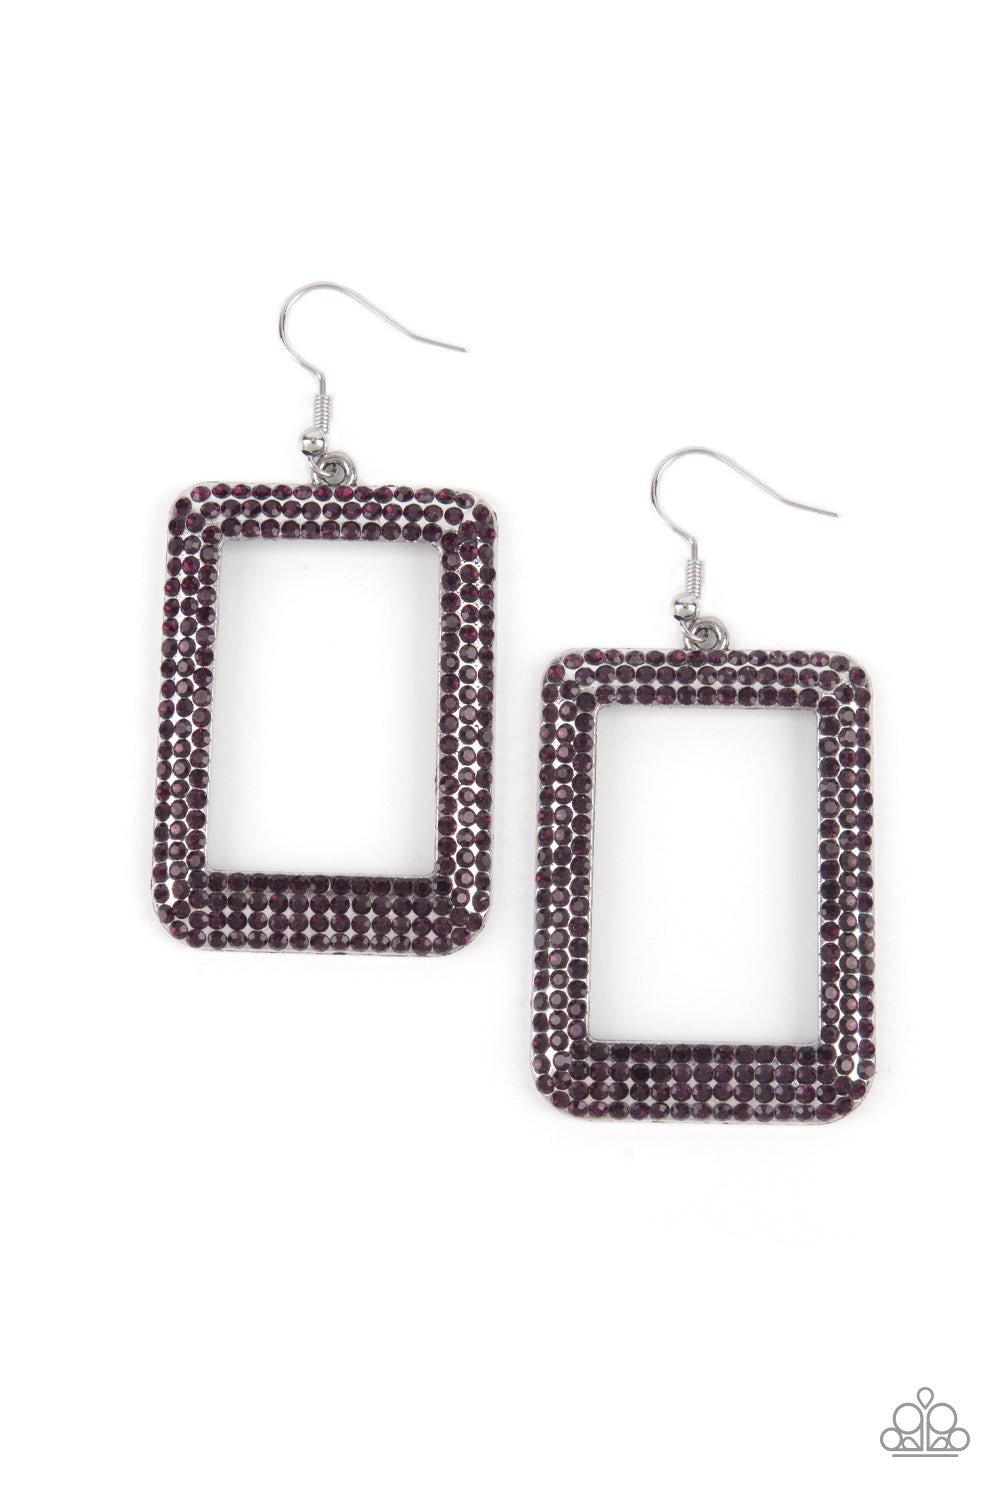 Paparazzi Accessories World FRAME-ous - Purple Fishhook Earrings bordered in rows of glittery purple rhinestones, an oversized silver rectangular frame swings from the ear for a fashionable finish. Earring attaches to a standard fishhook fitting.